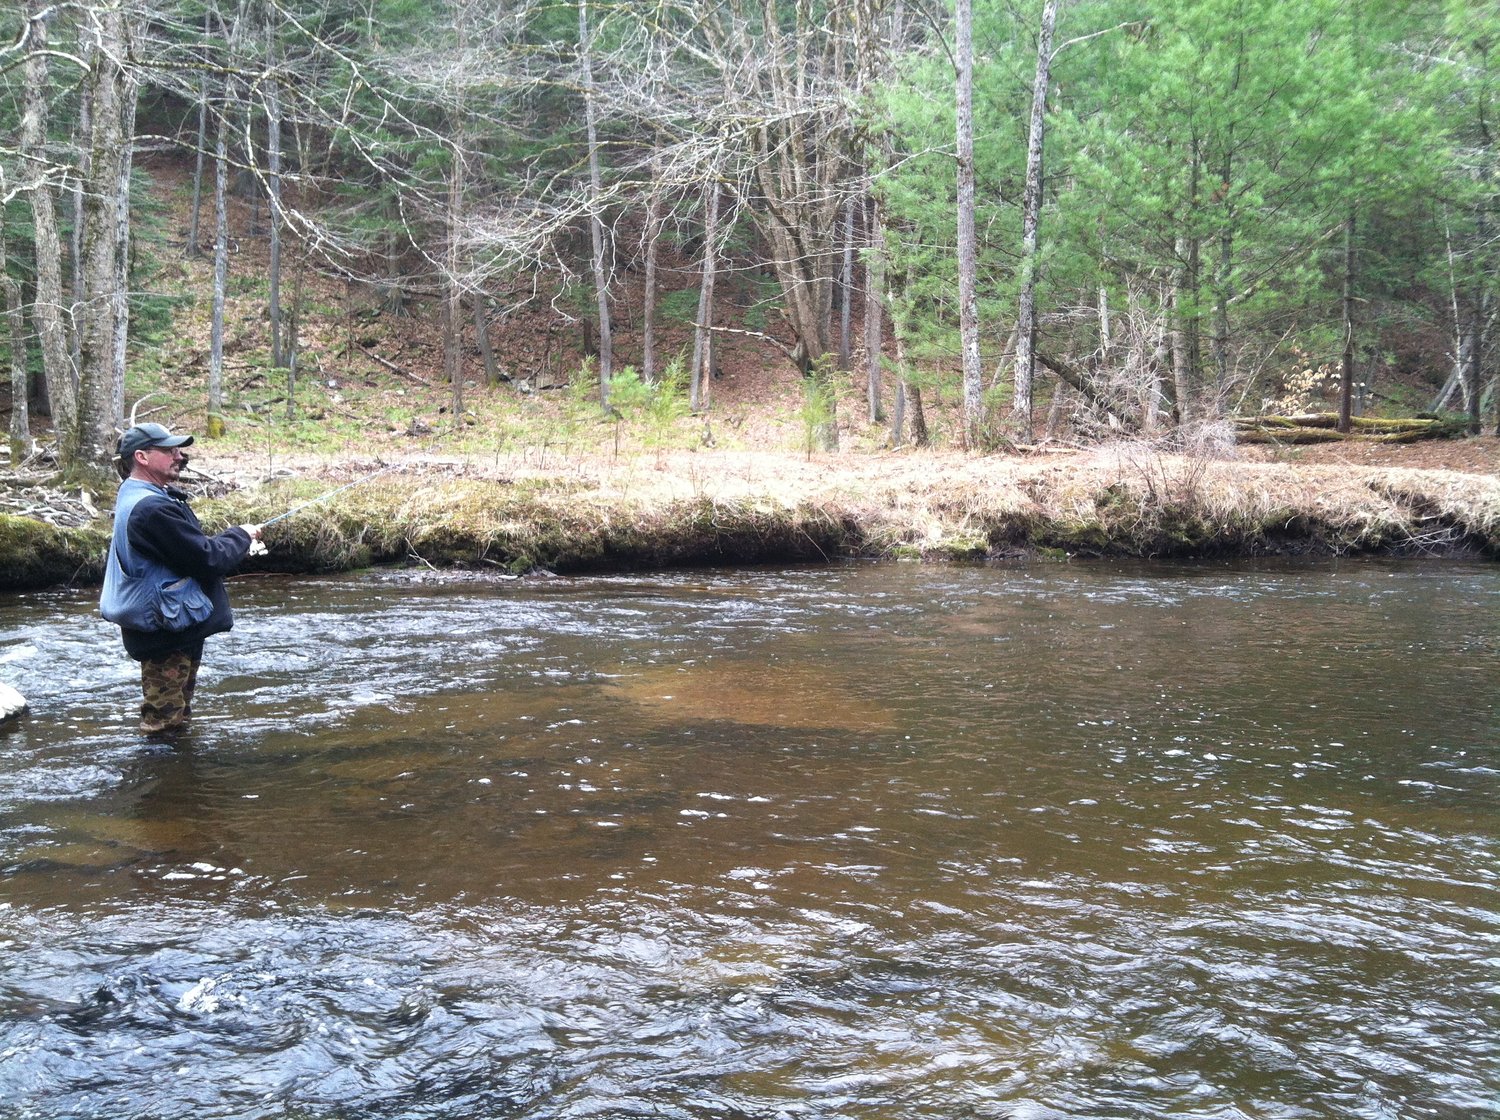 Photo by JohnMichael Tussel

The author fishes in the Lackawaxen River every opportunity he gets.&nbsp;